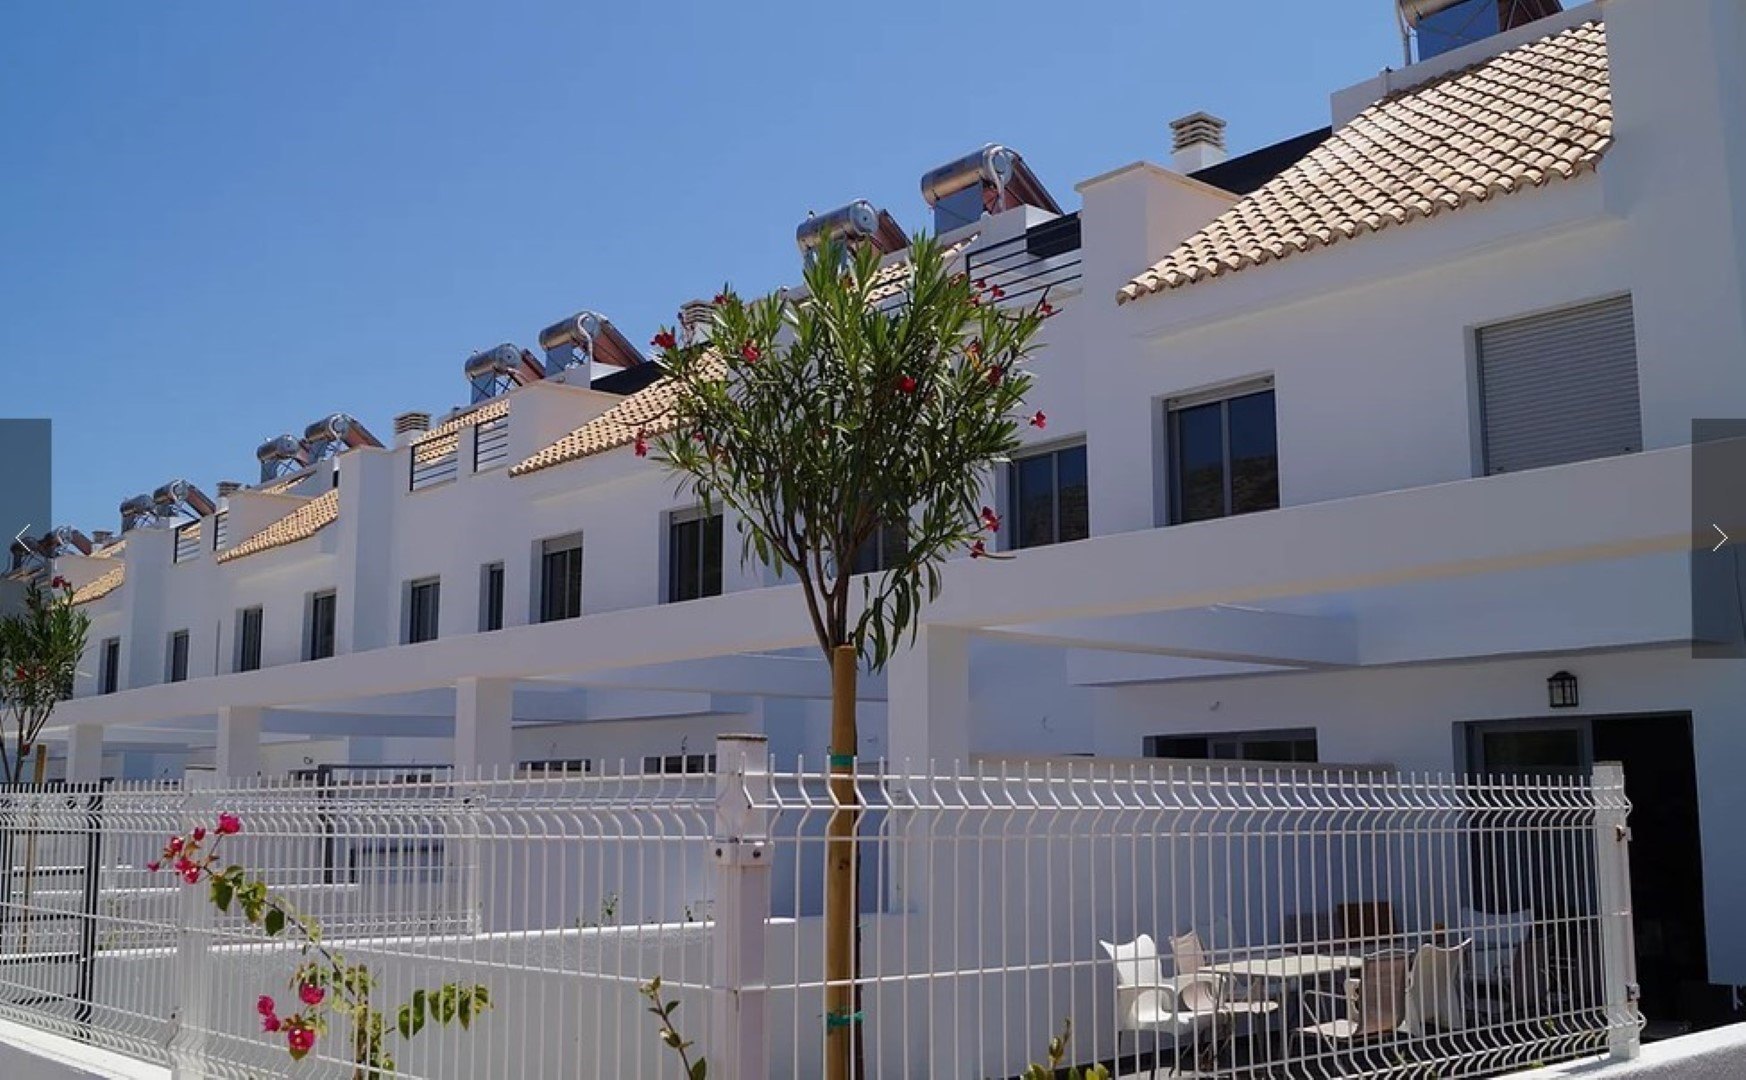 Bungalow in Jesus Pobre New 3-bedroom townhouse for sale